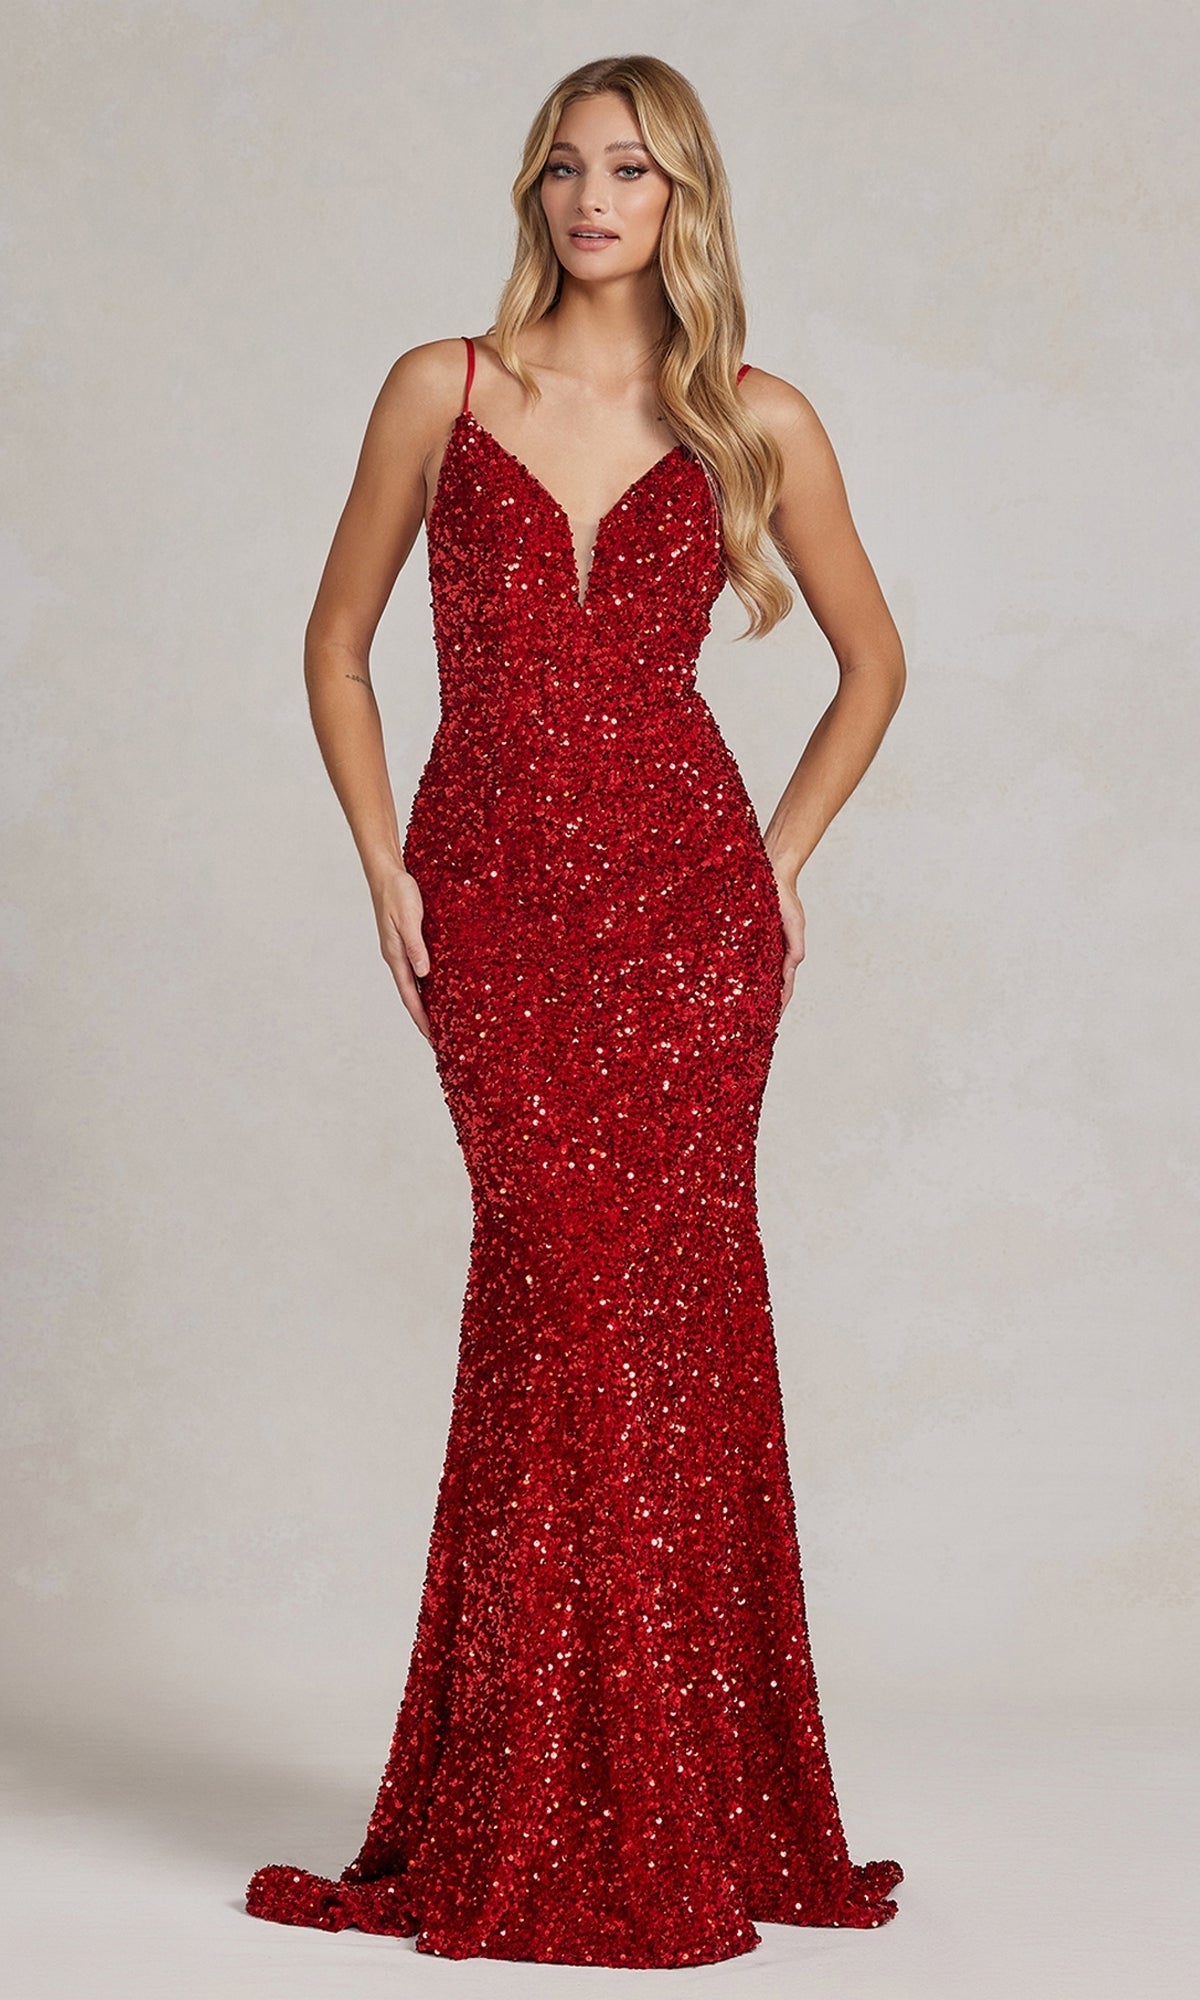 Red Long Sequin Formal Dress with Sheer Sides